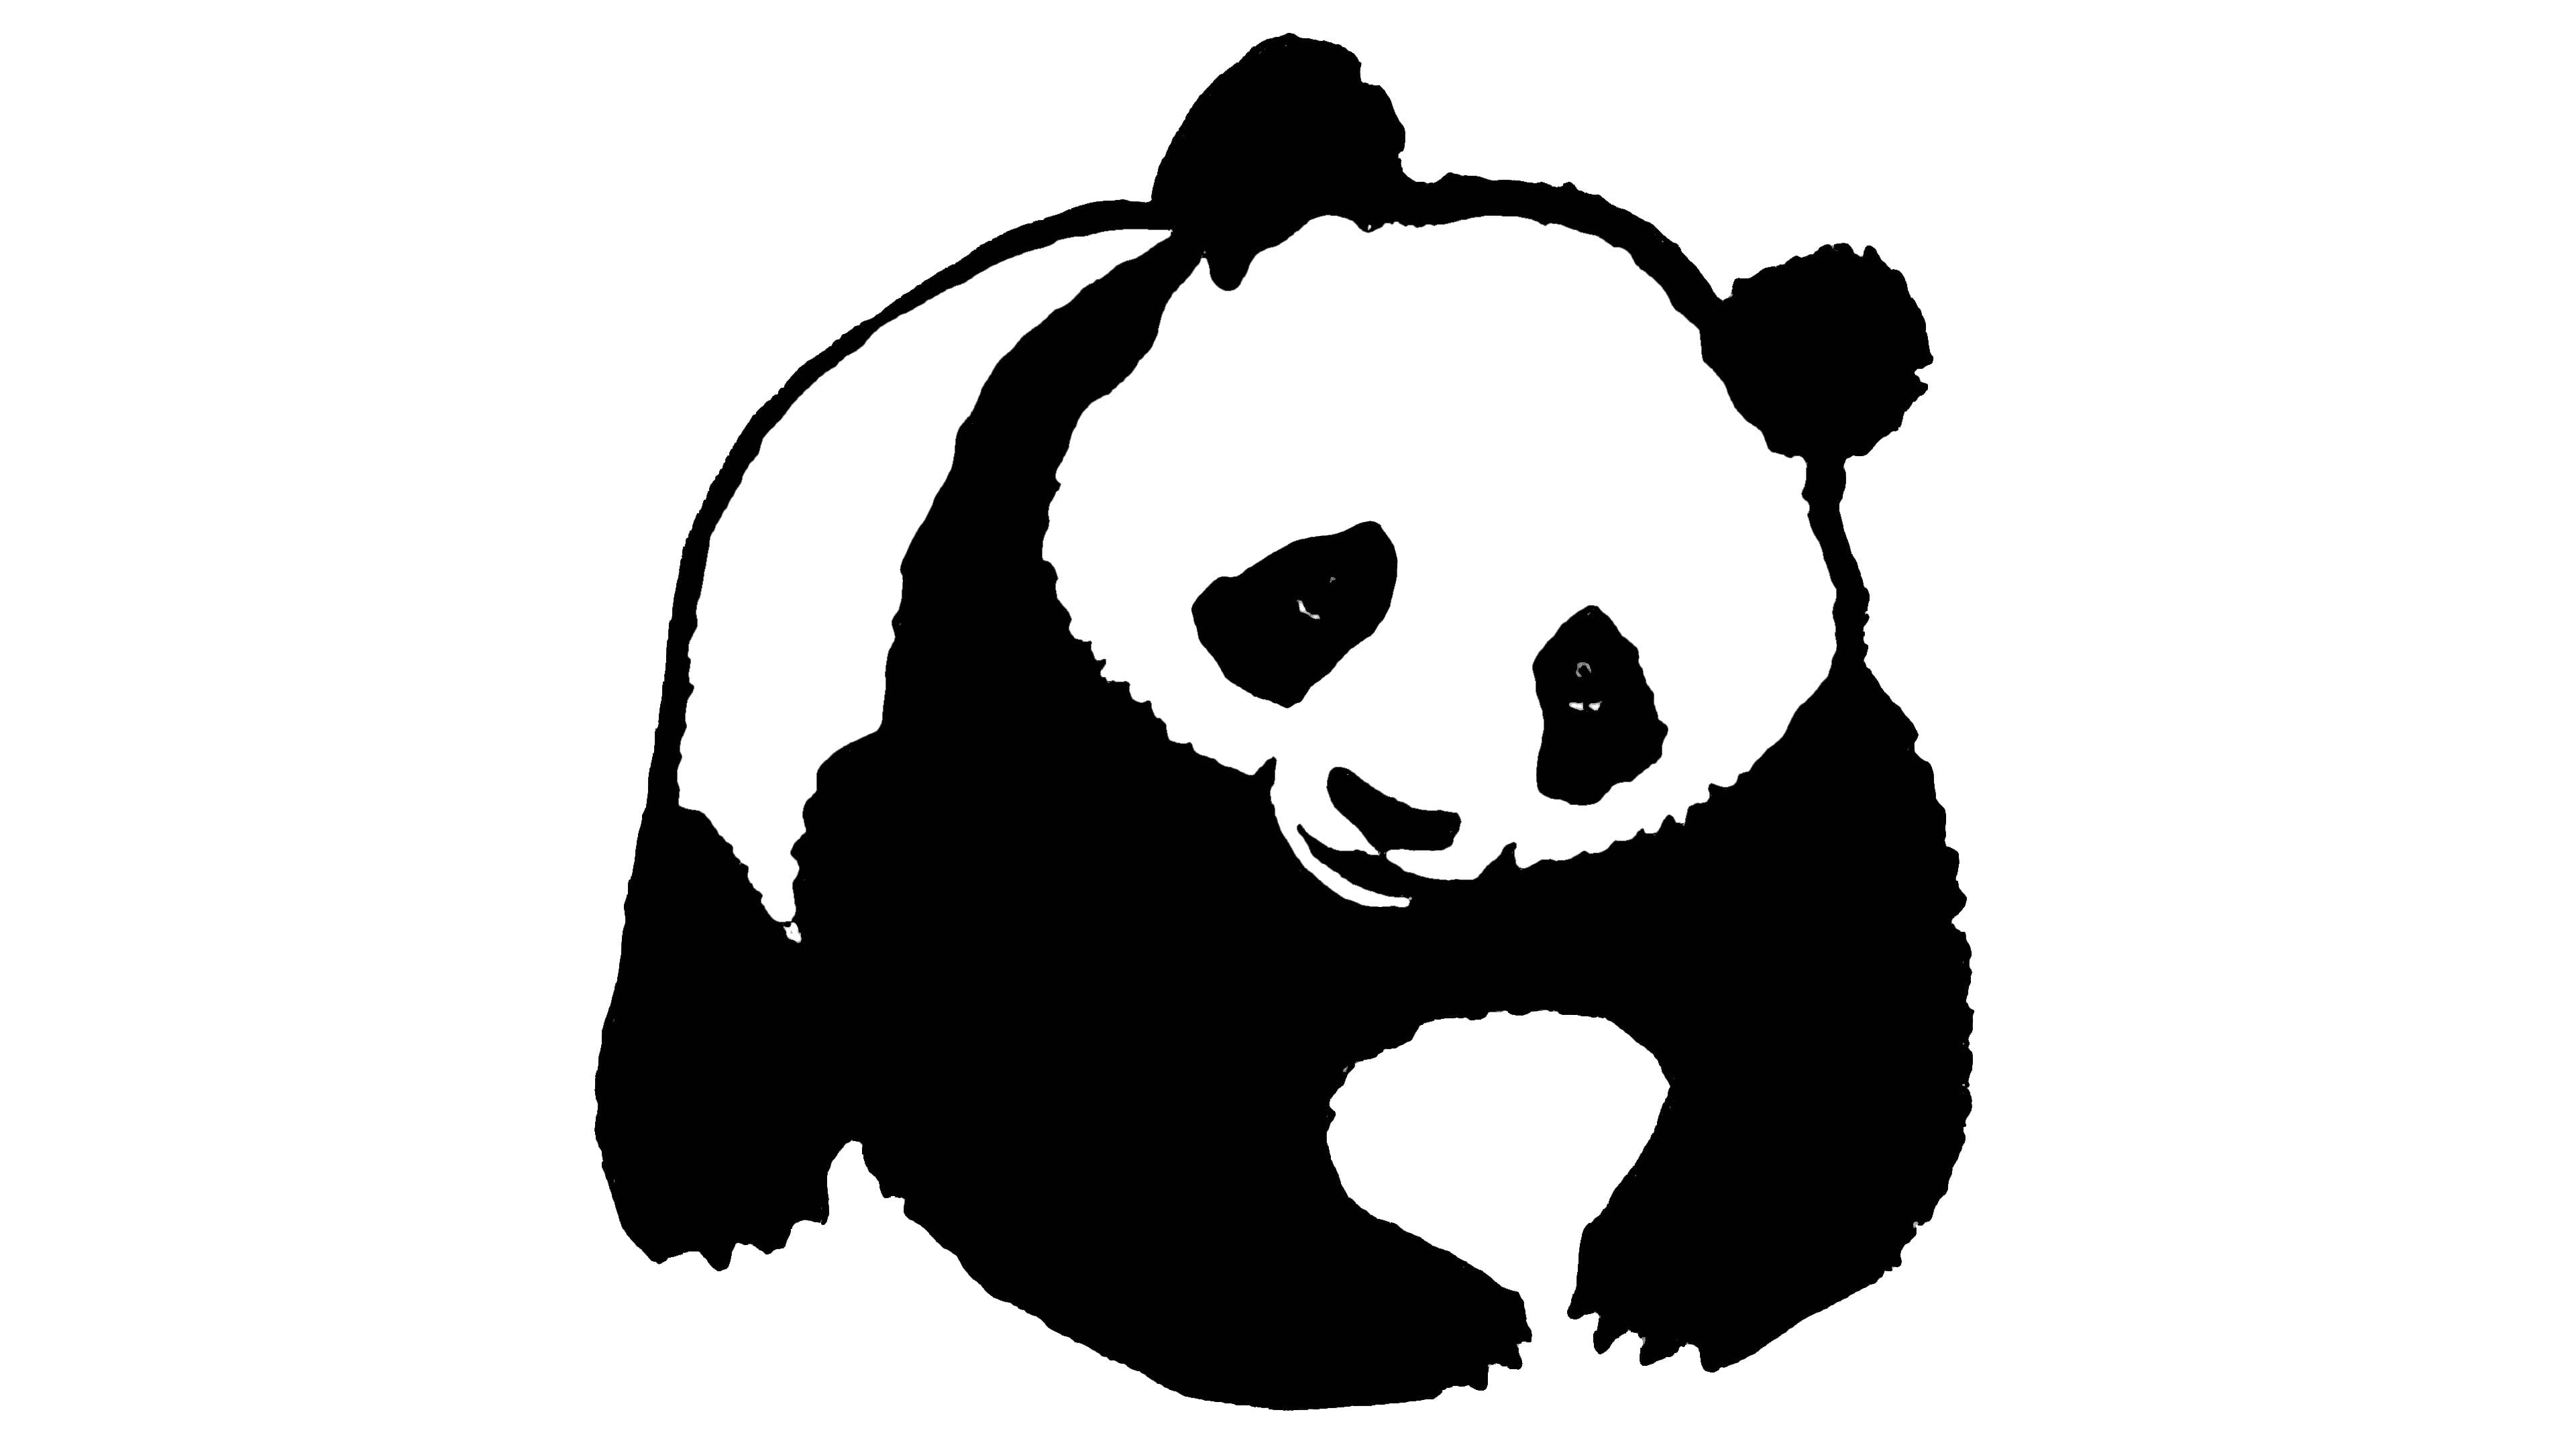 World Wildlife Fund logo and meaning, history,